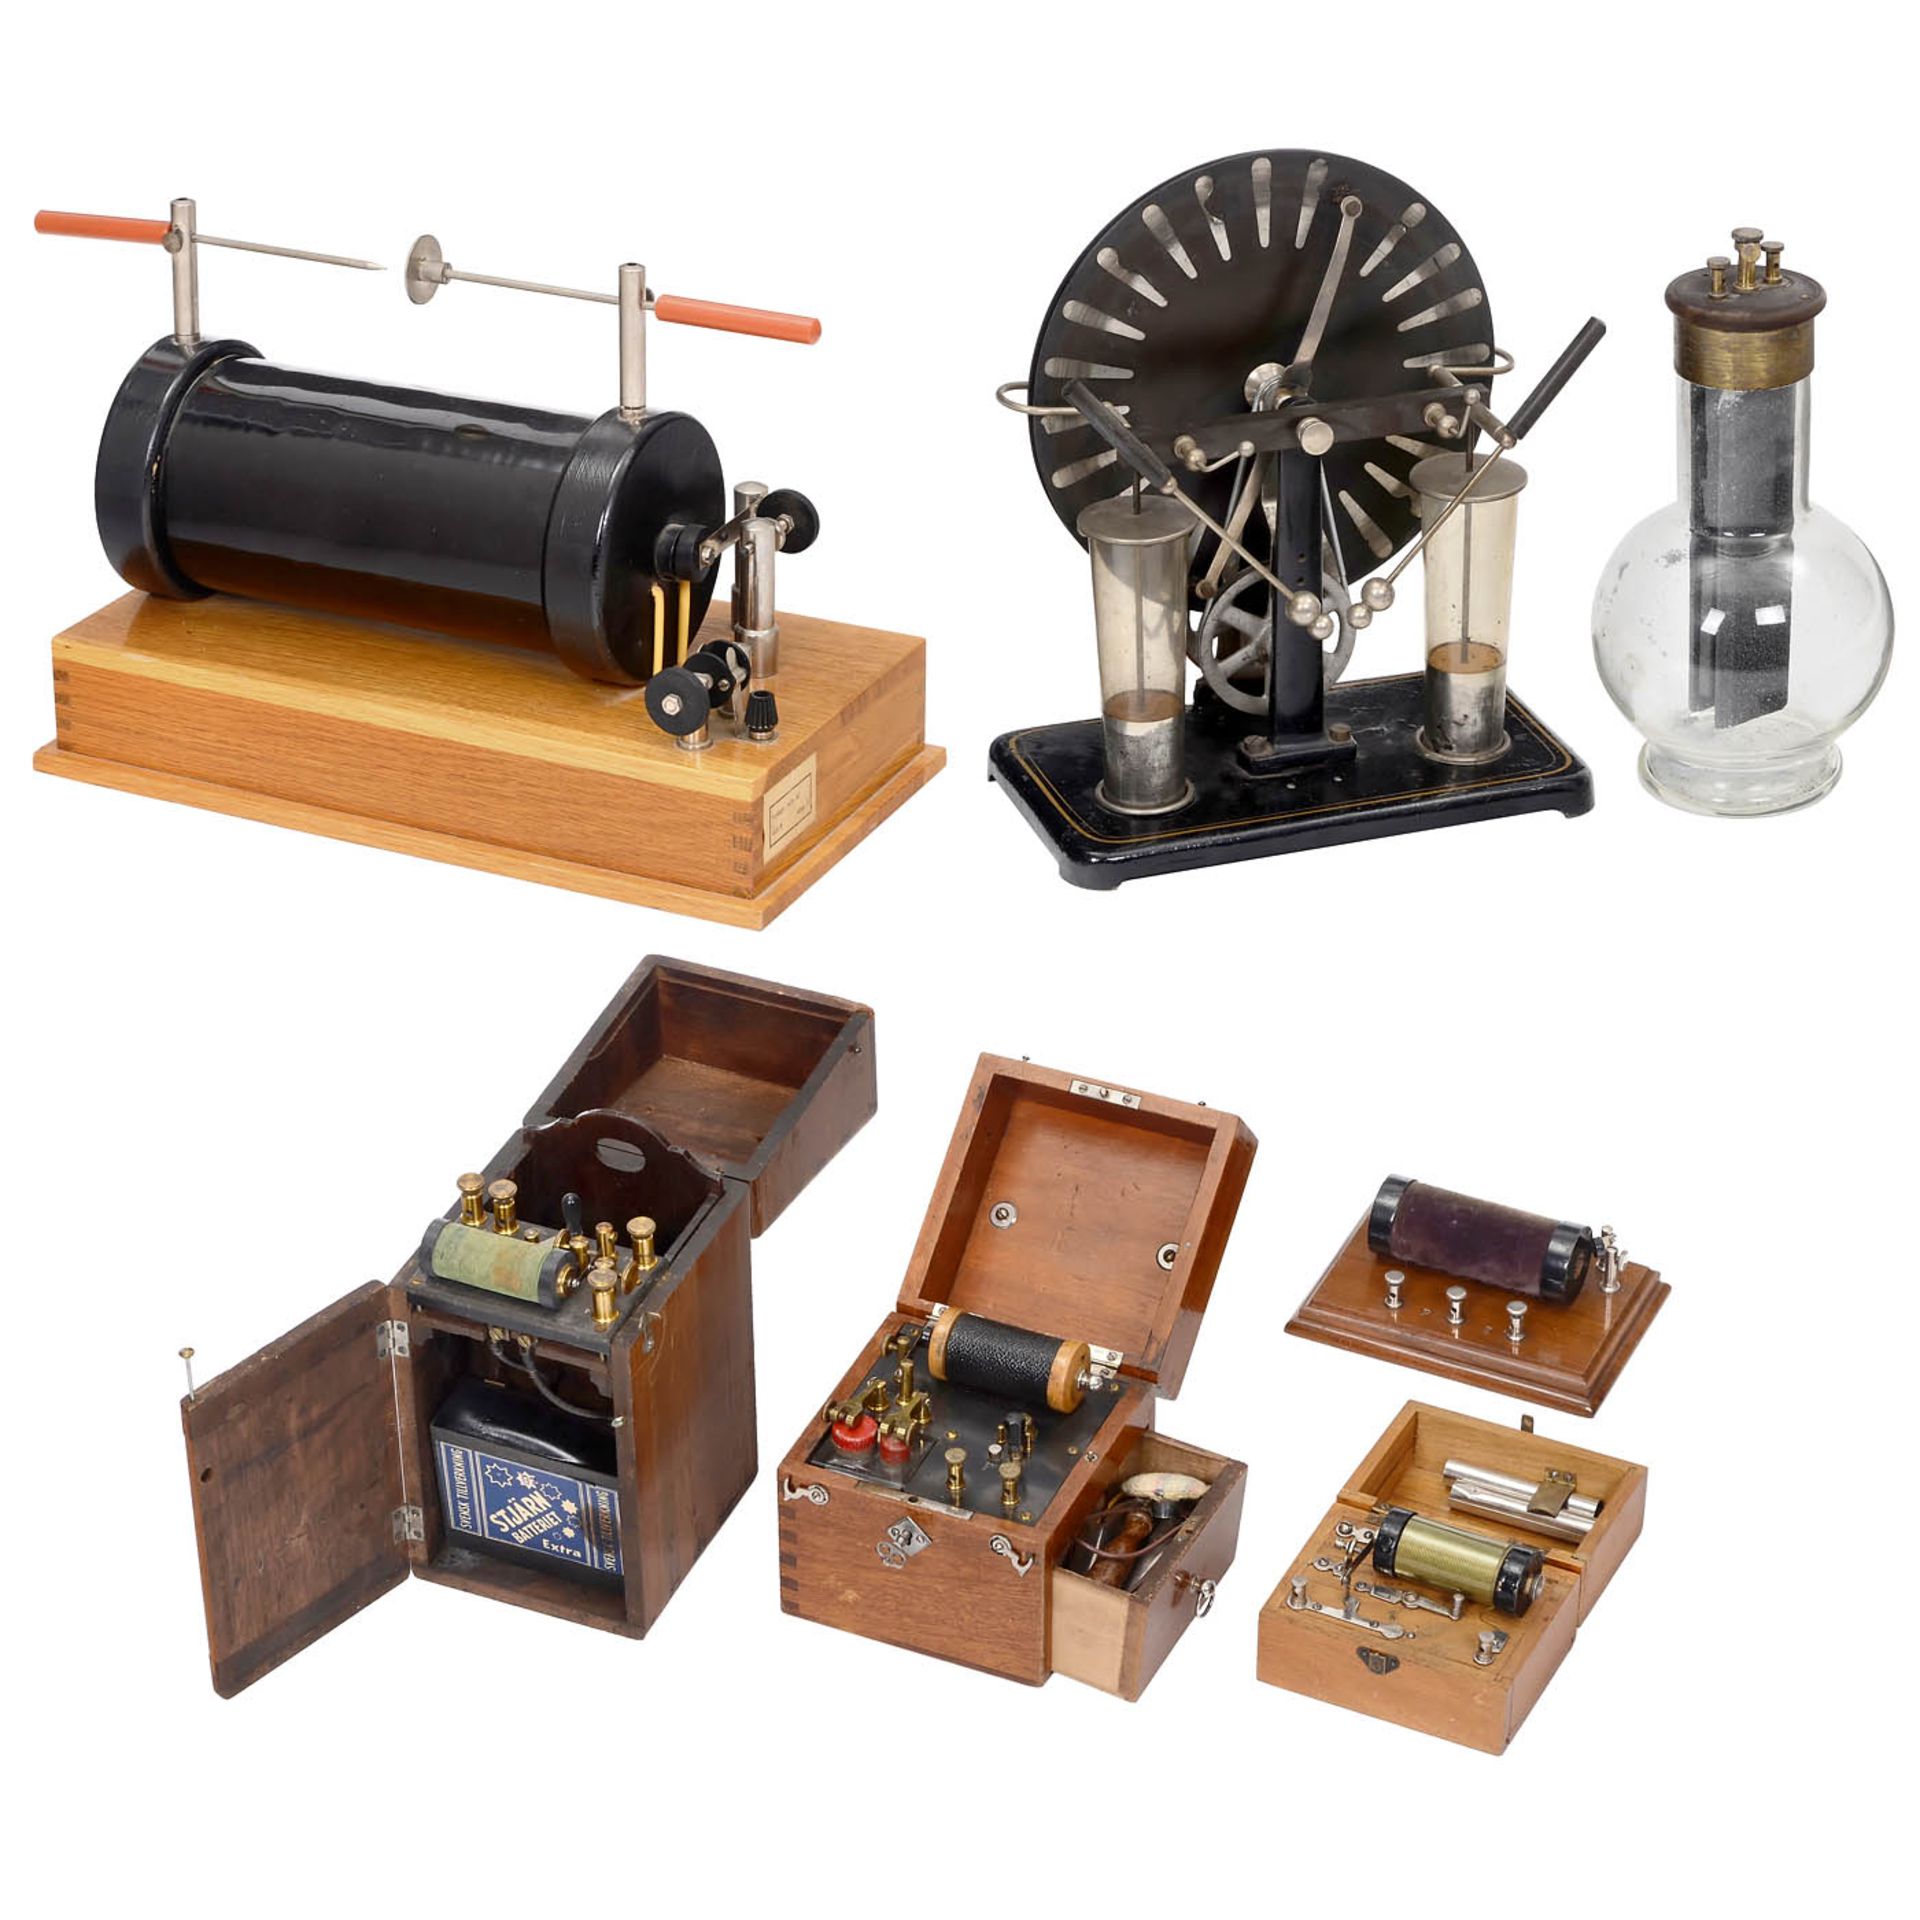 Electrotherapeutical Devices and Physical Instruments, c. 1900-20